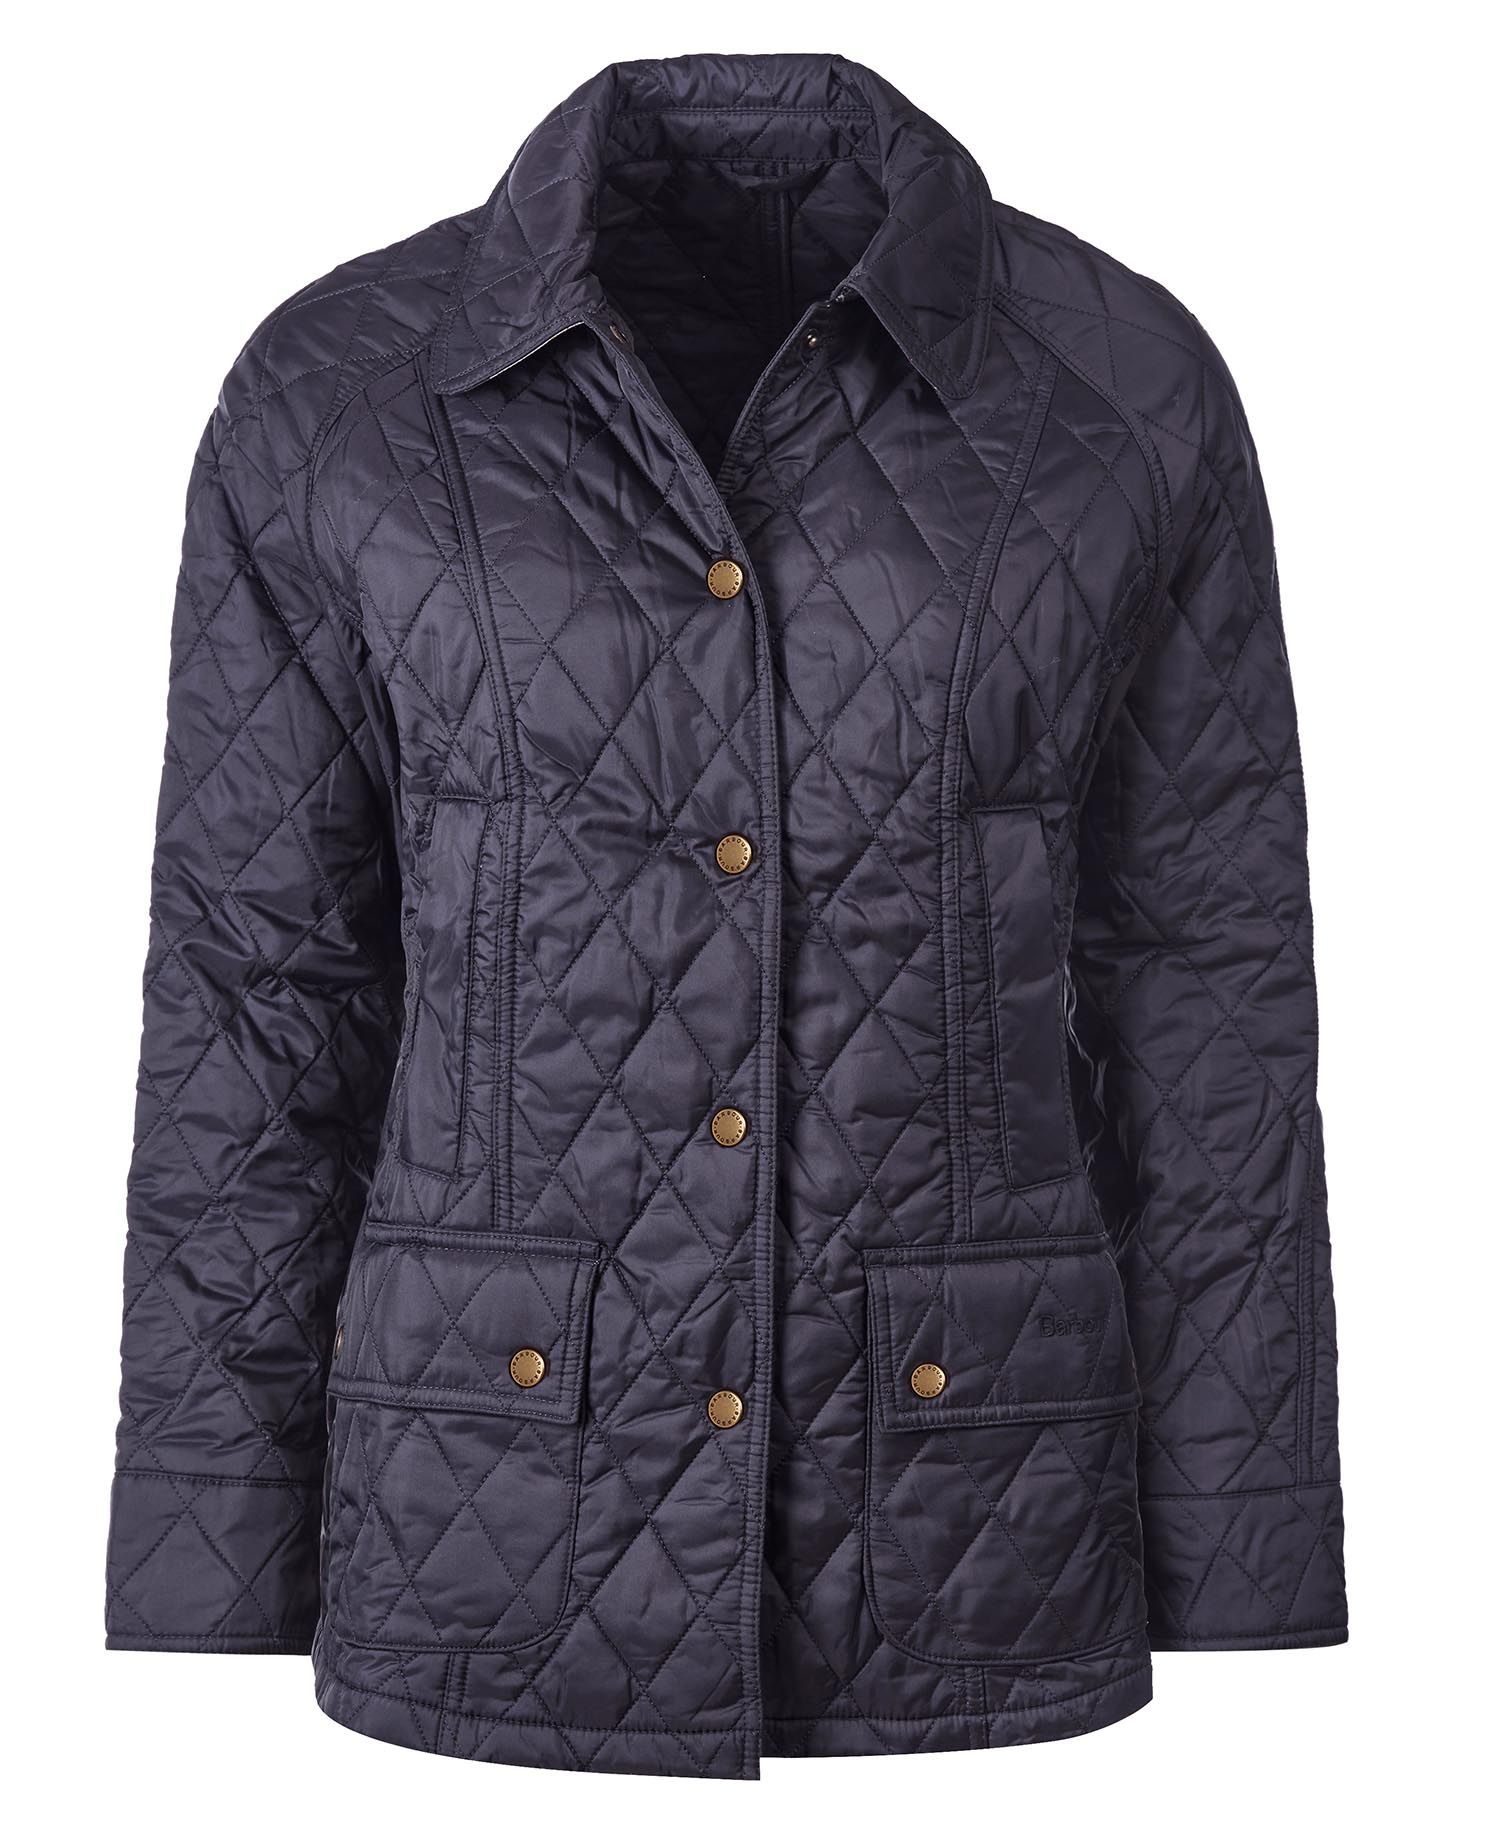 Barbour Summer Beadnell Quilt in Navy | Barbour